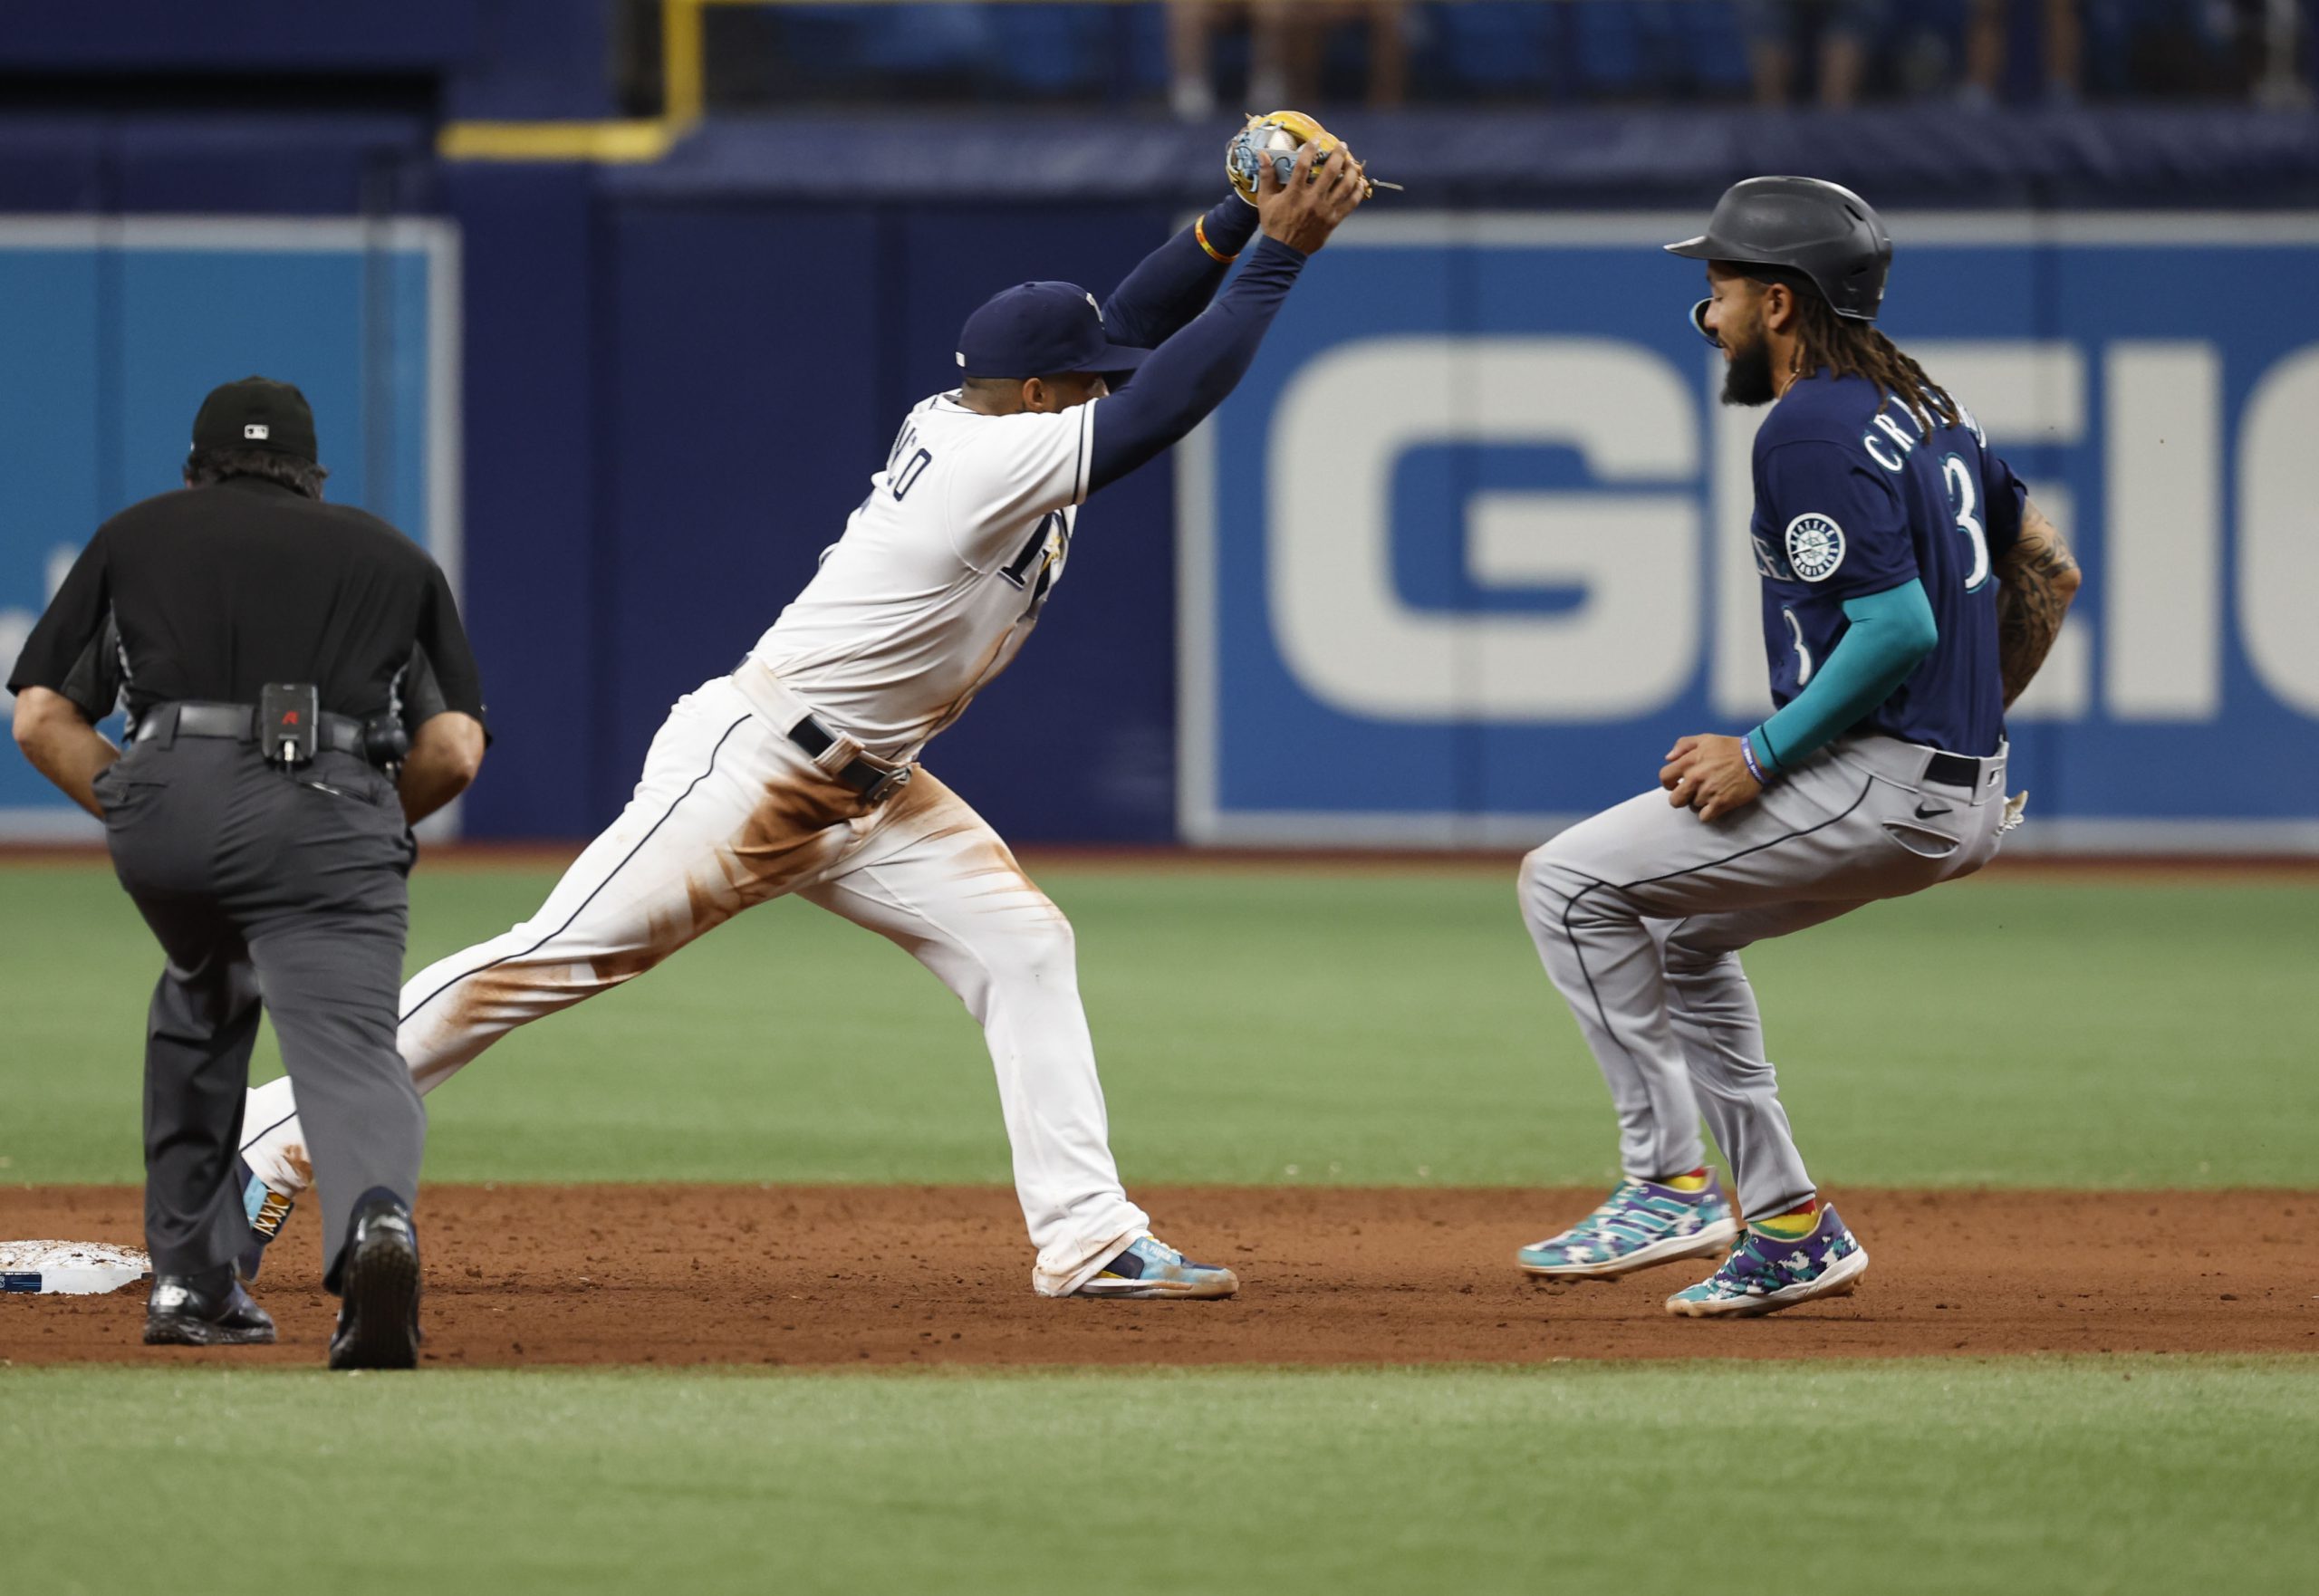 Rays catchers were the unsung heroes of the opening series - DRaysBay